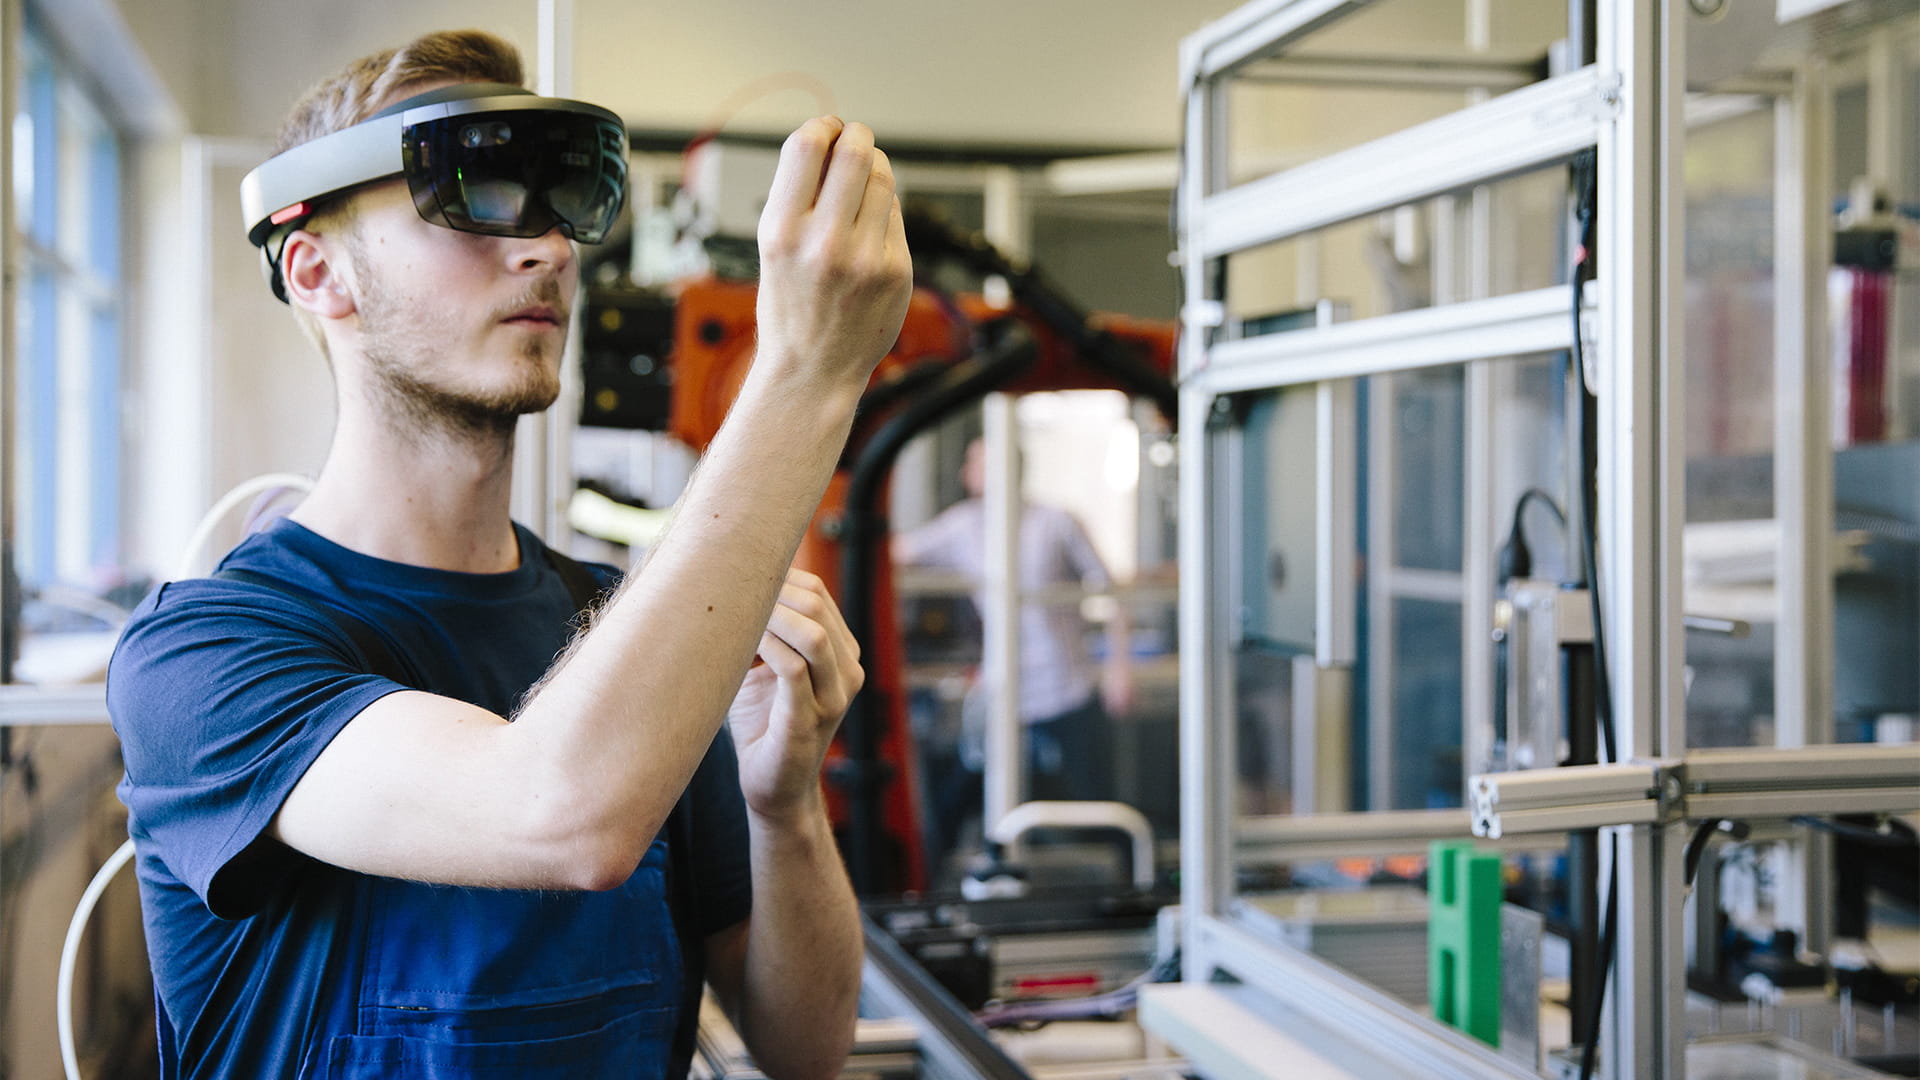 Engineer works with a head-mounted display